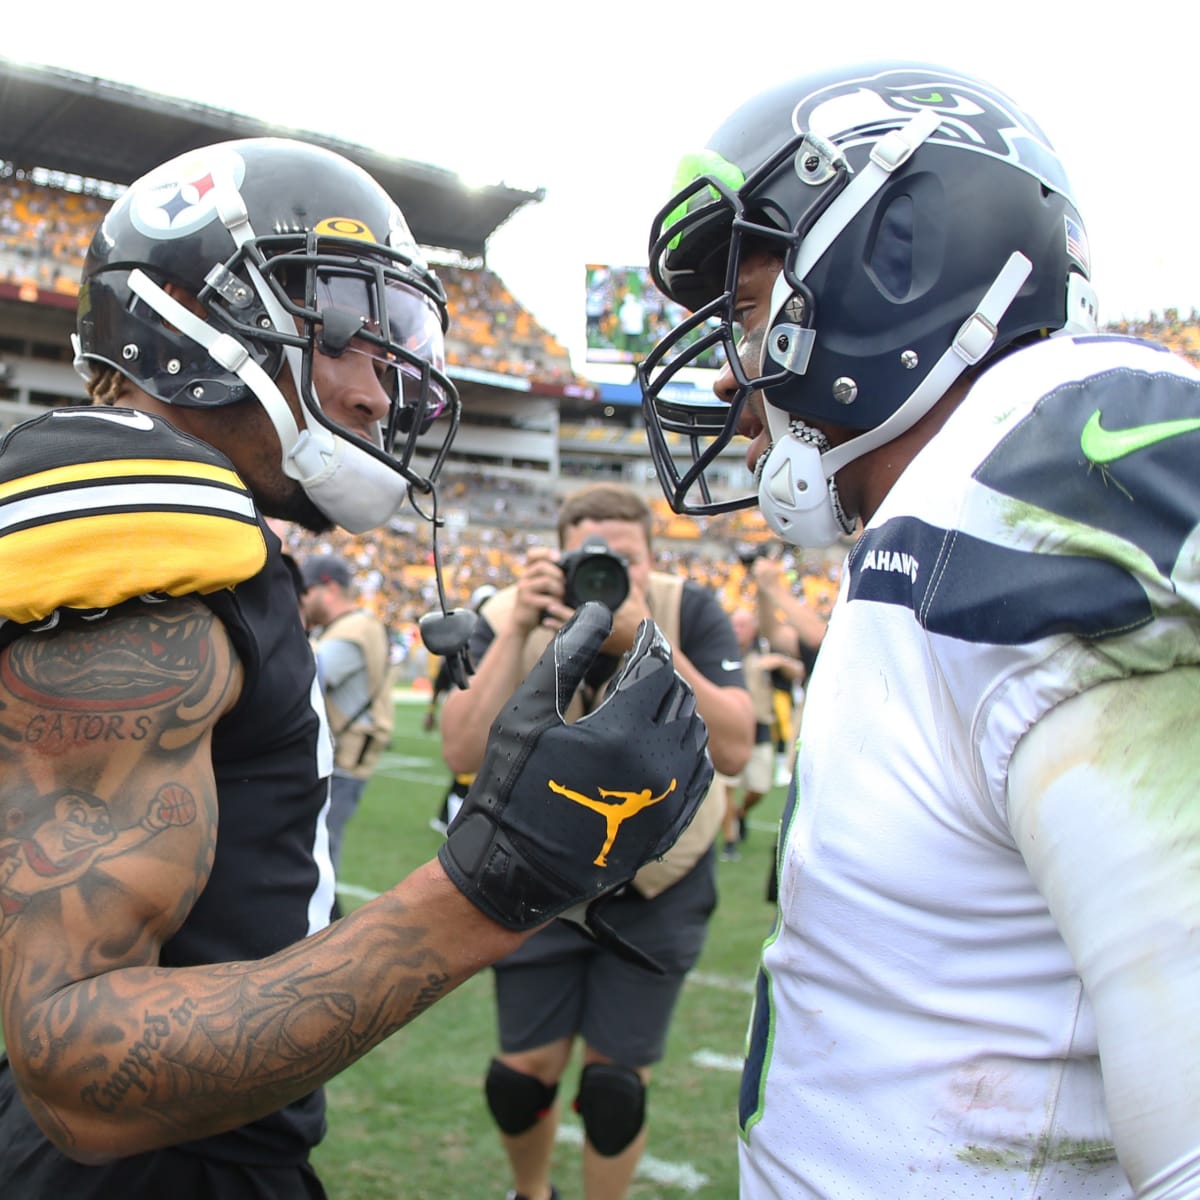 Grading the Seahawks' 28-26 victory over the Steelers